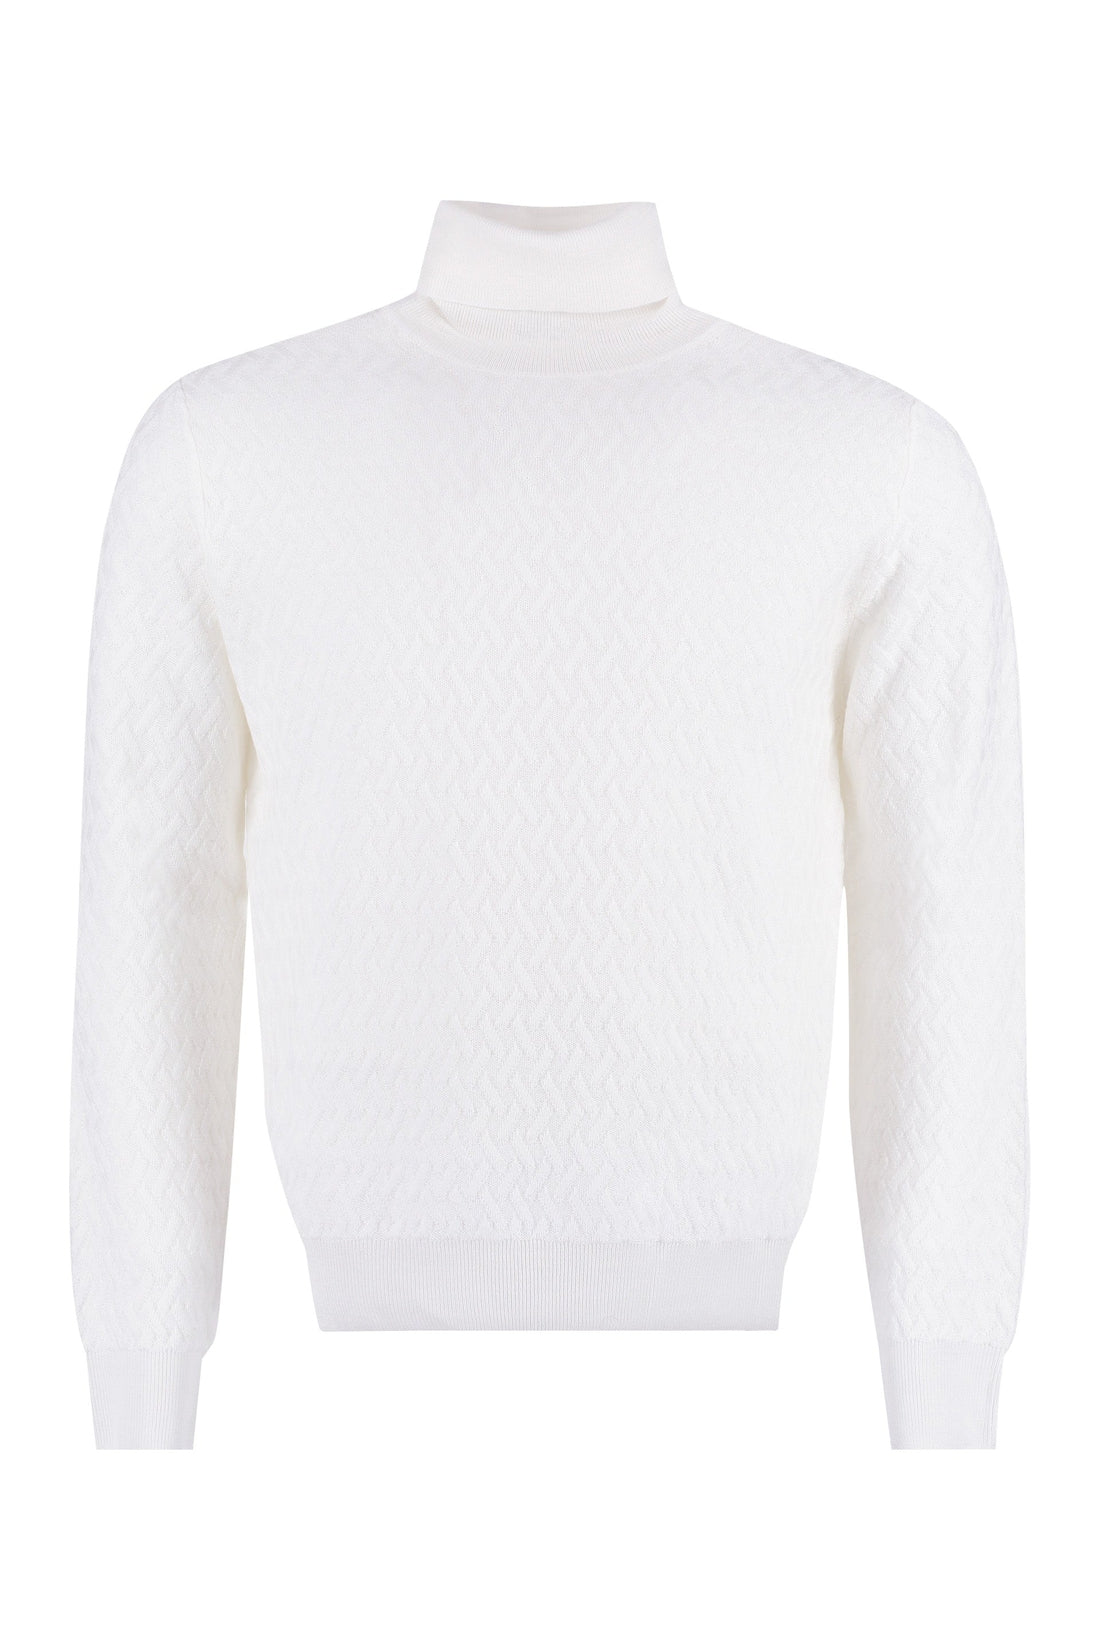 Canali-OUTLET-SALE-Long sleeve wool turtleneck sweater-ARCHIVIST